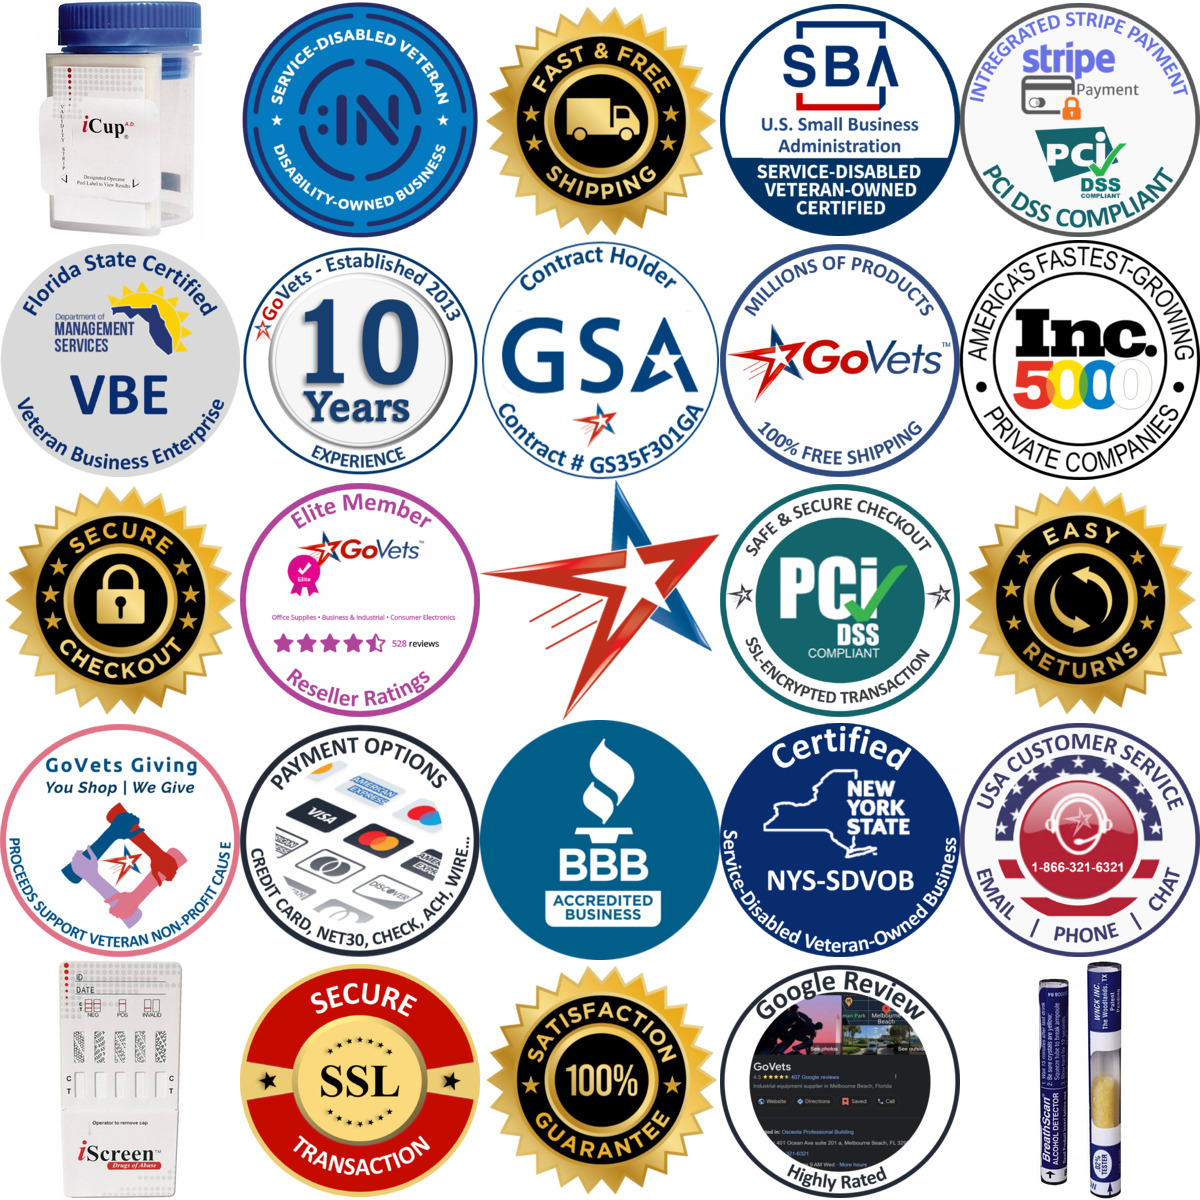 A selection of Drug and Alcohol Testing products on GoVets